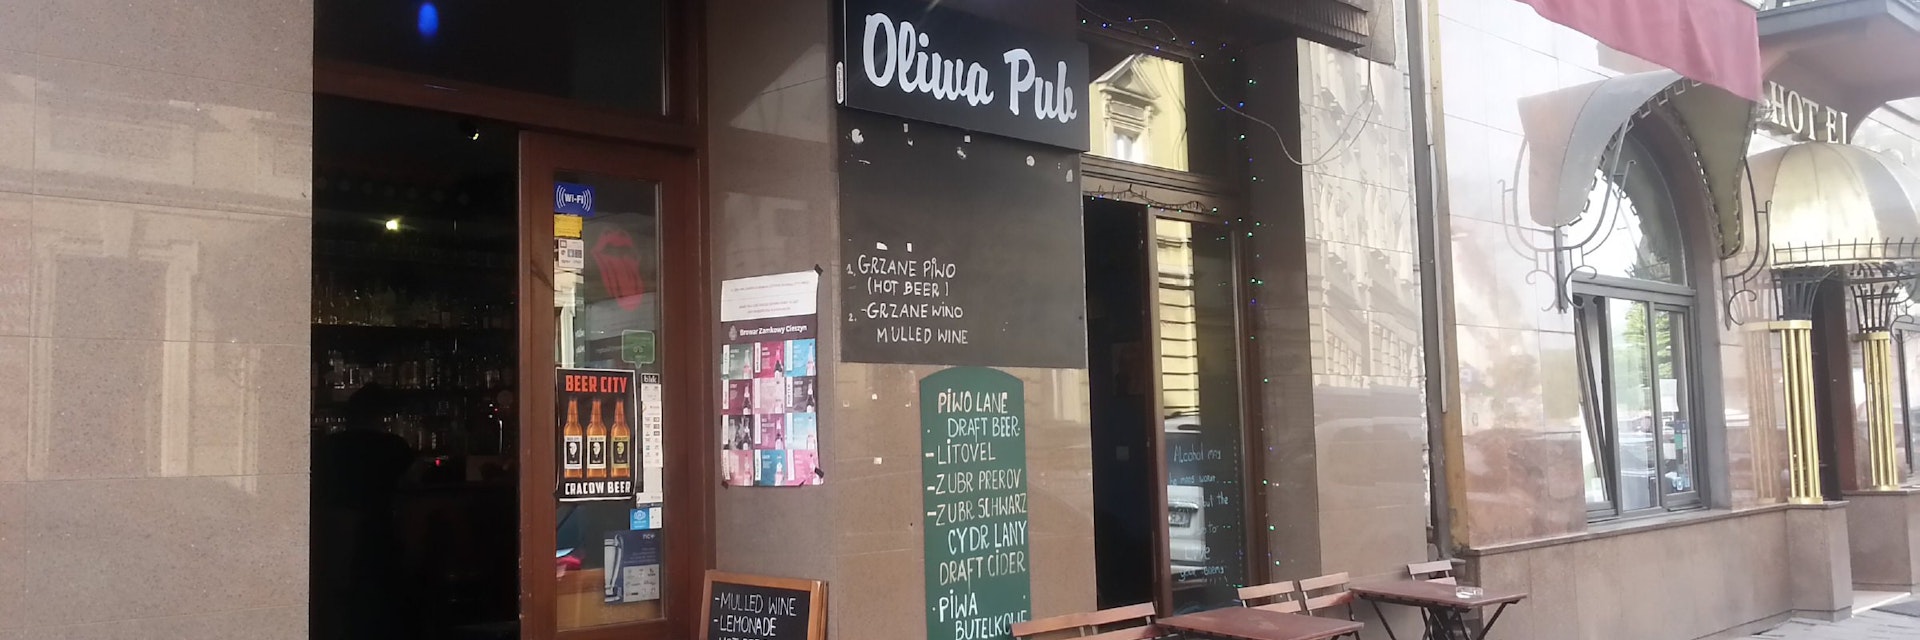 The simple yet inviting exterior of Oliwa Pub along Miodowa Street